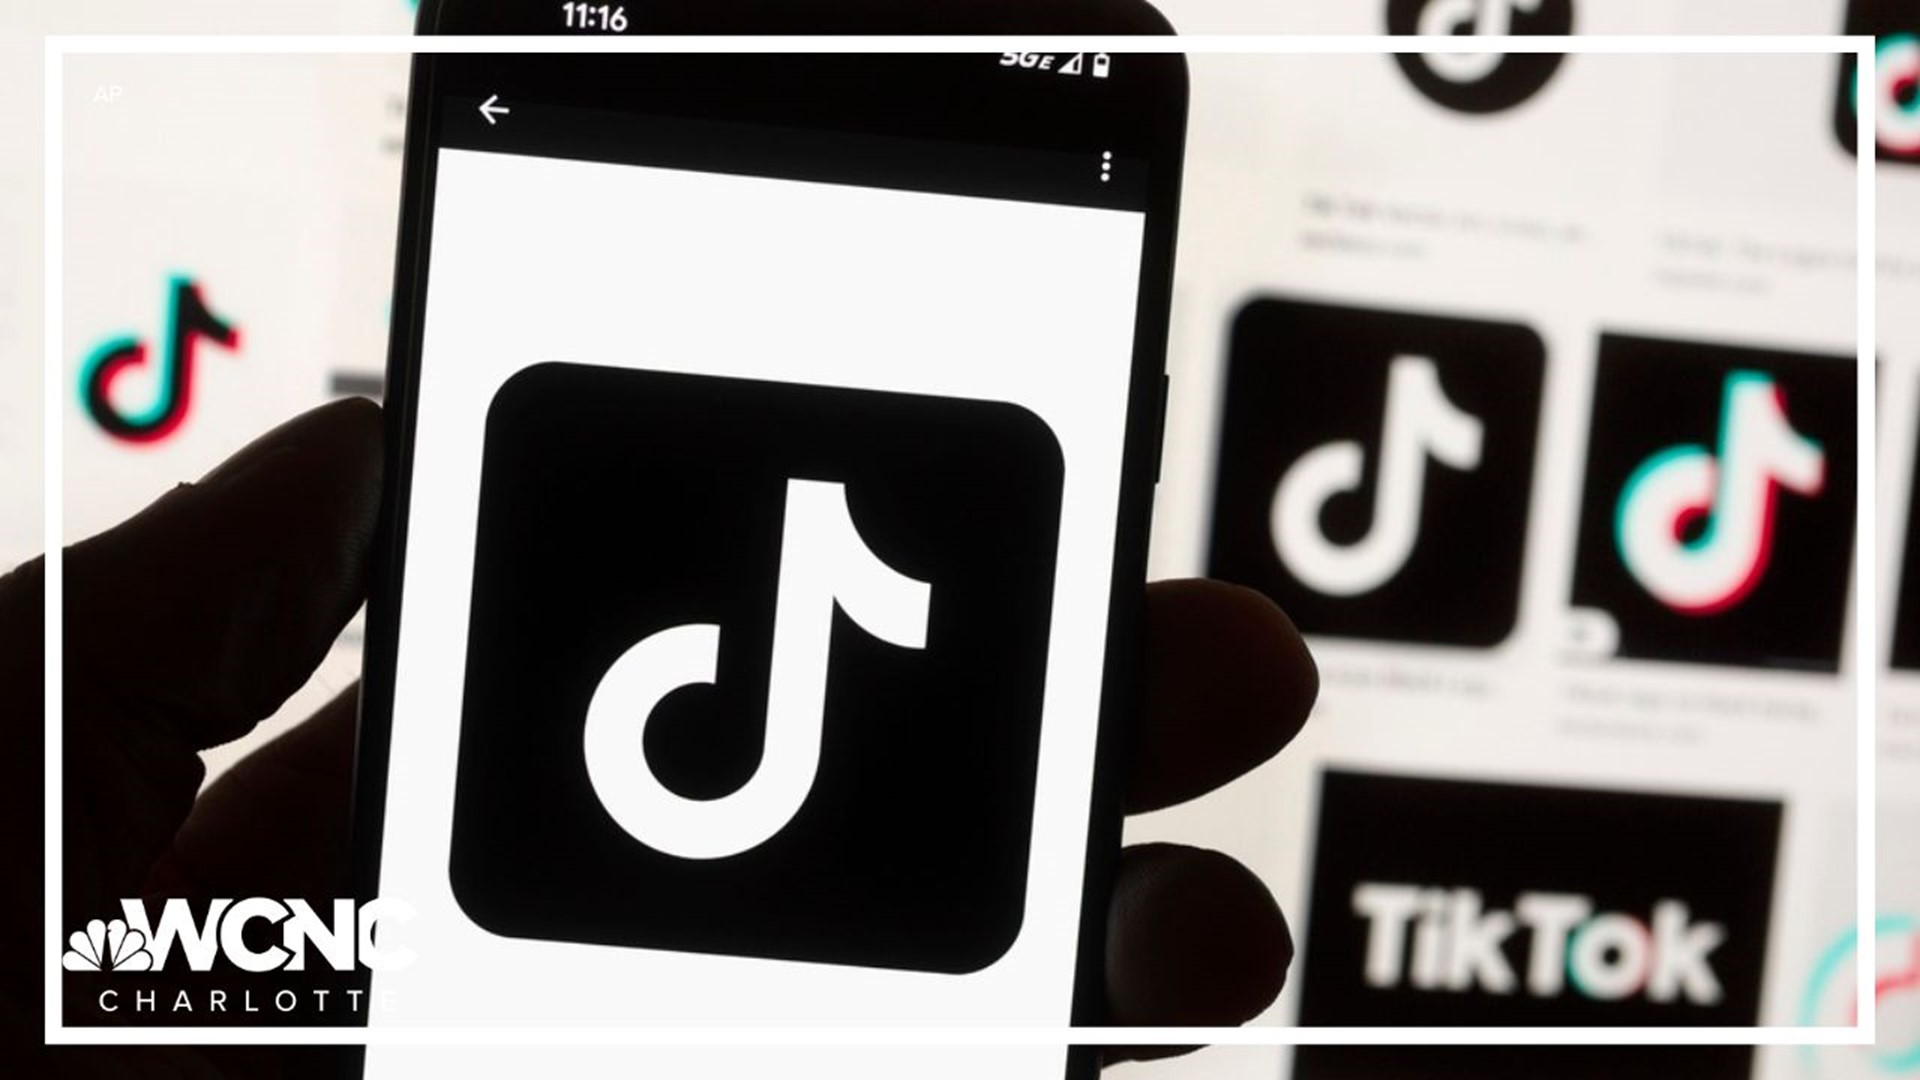 WCNC’s Jane Monreal looks into what the constant scrolling on TikTok could be doing to our mental health.